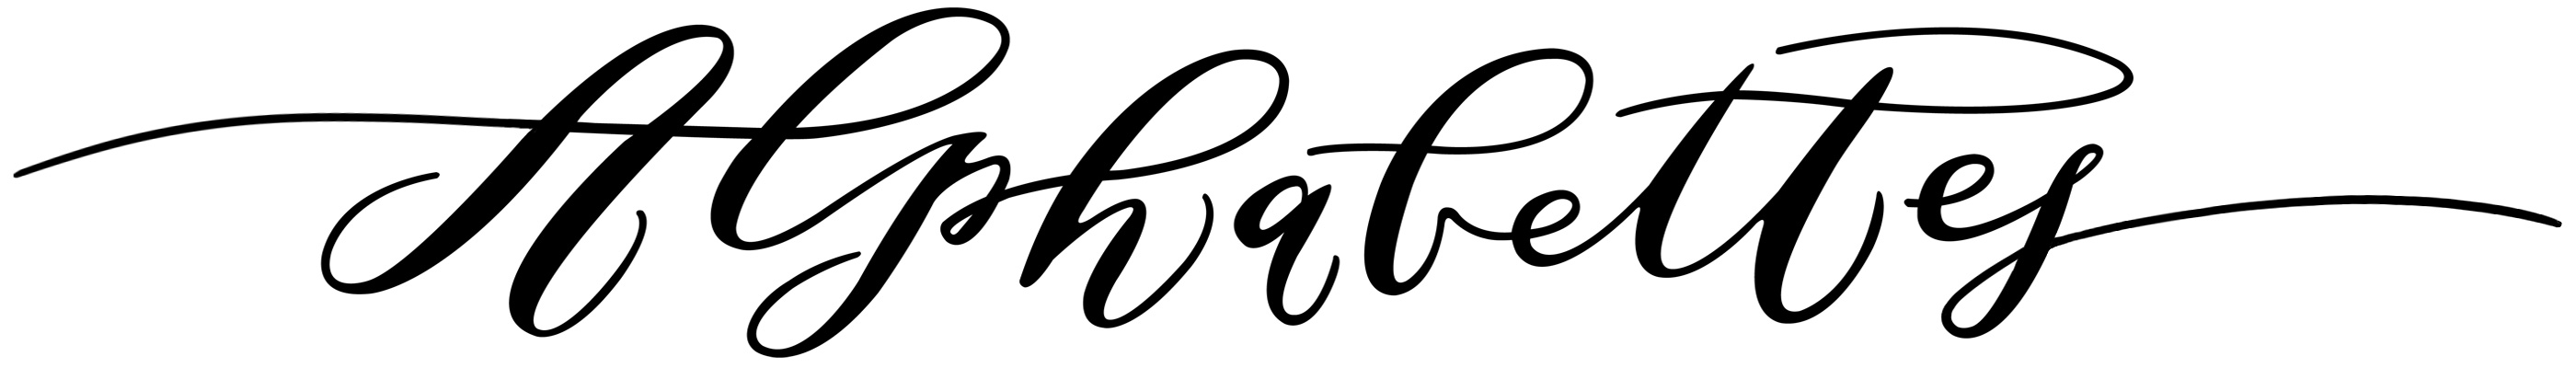 Hand lettered semi-connected black and white script of Alphabettes logo